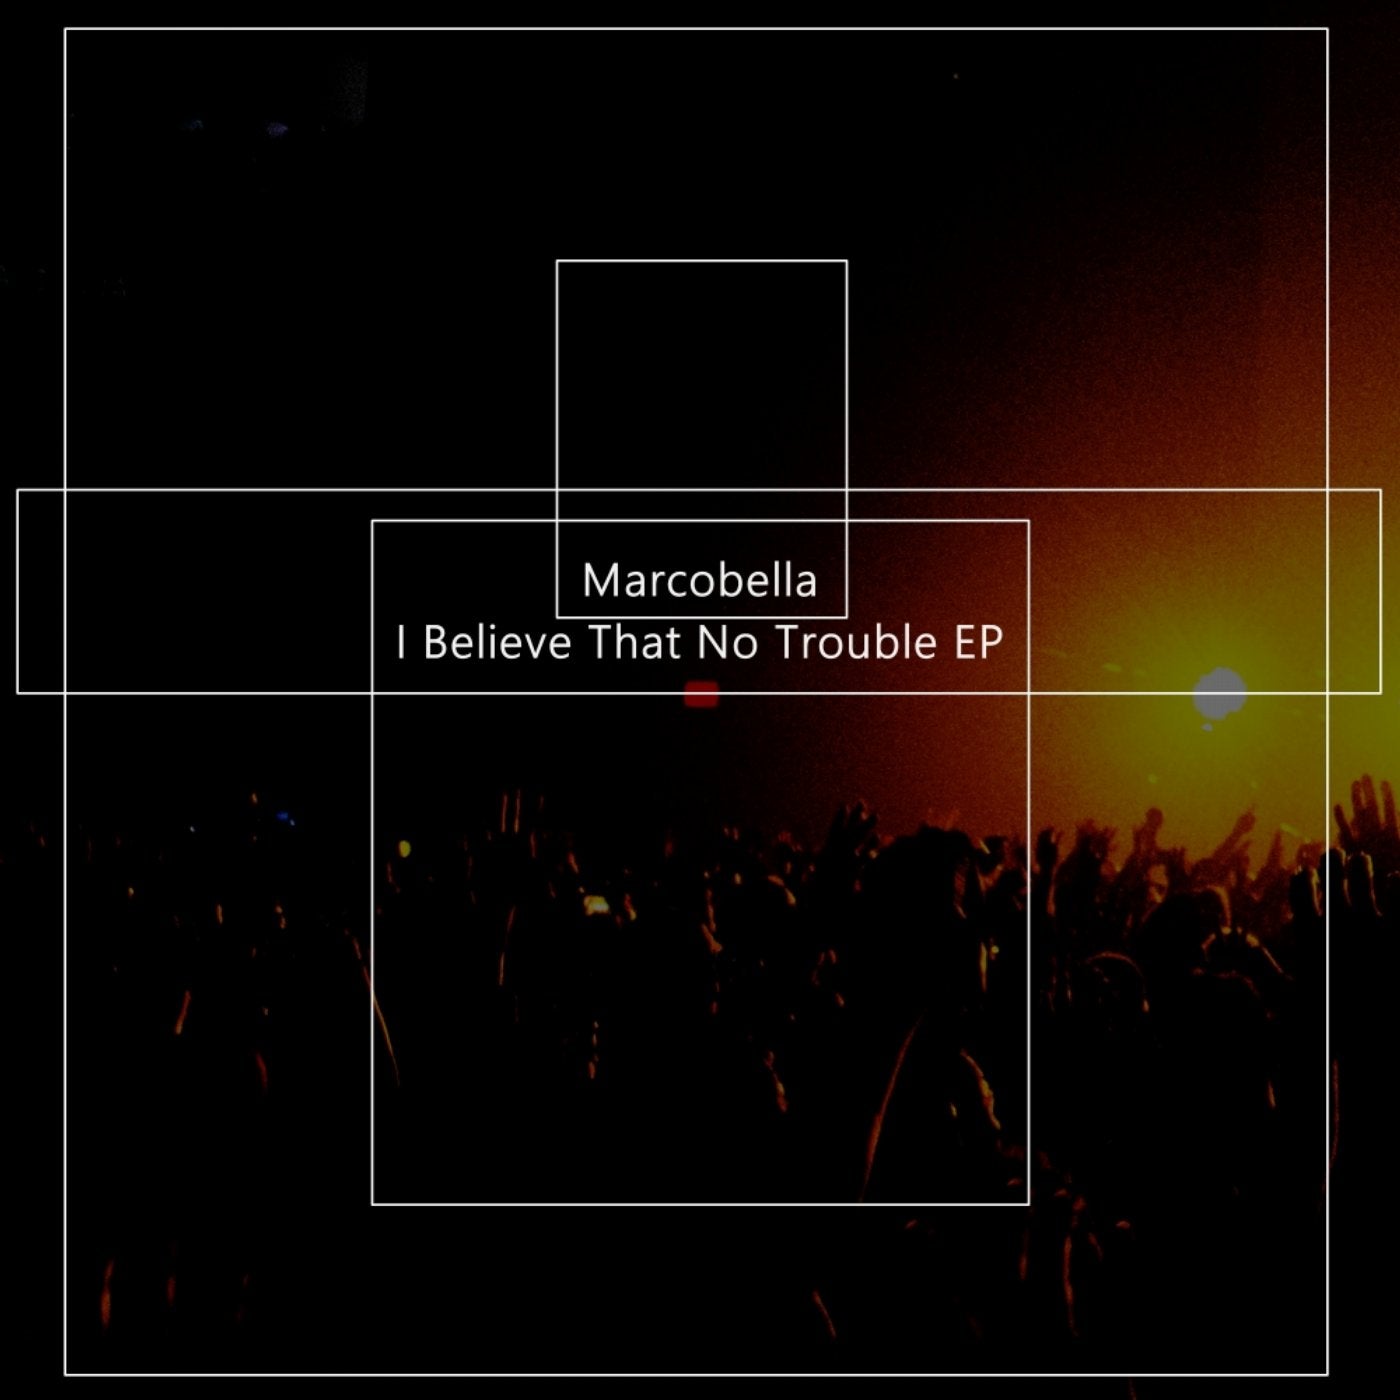 I Believe That No Trouble EP